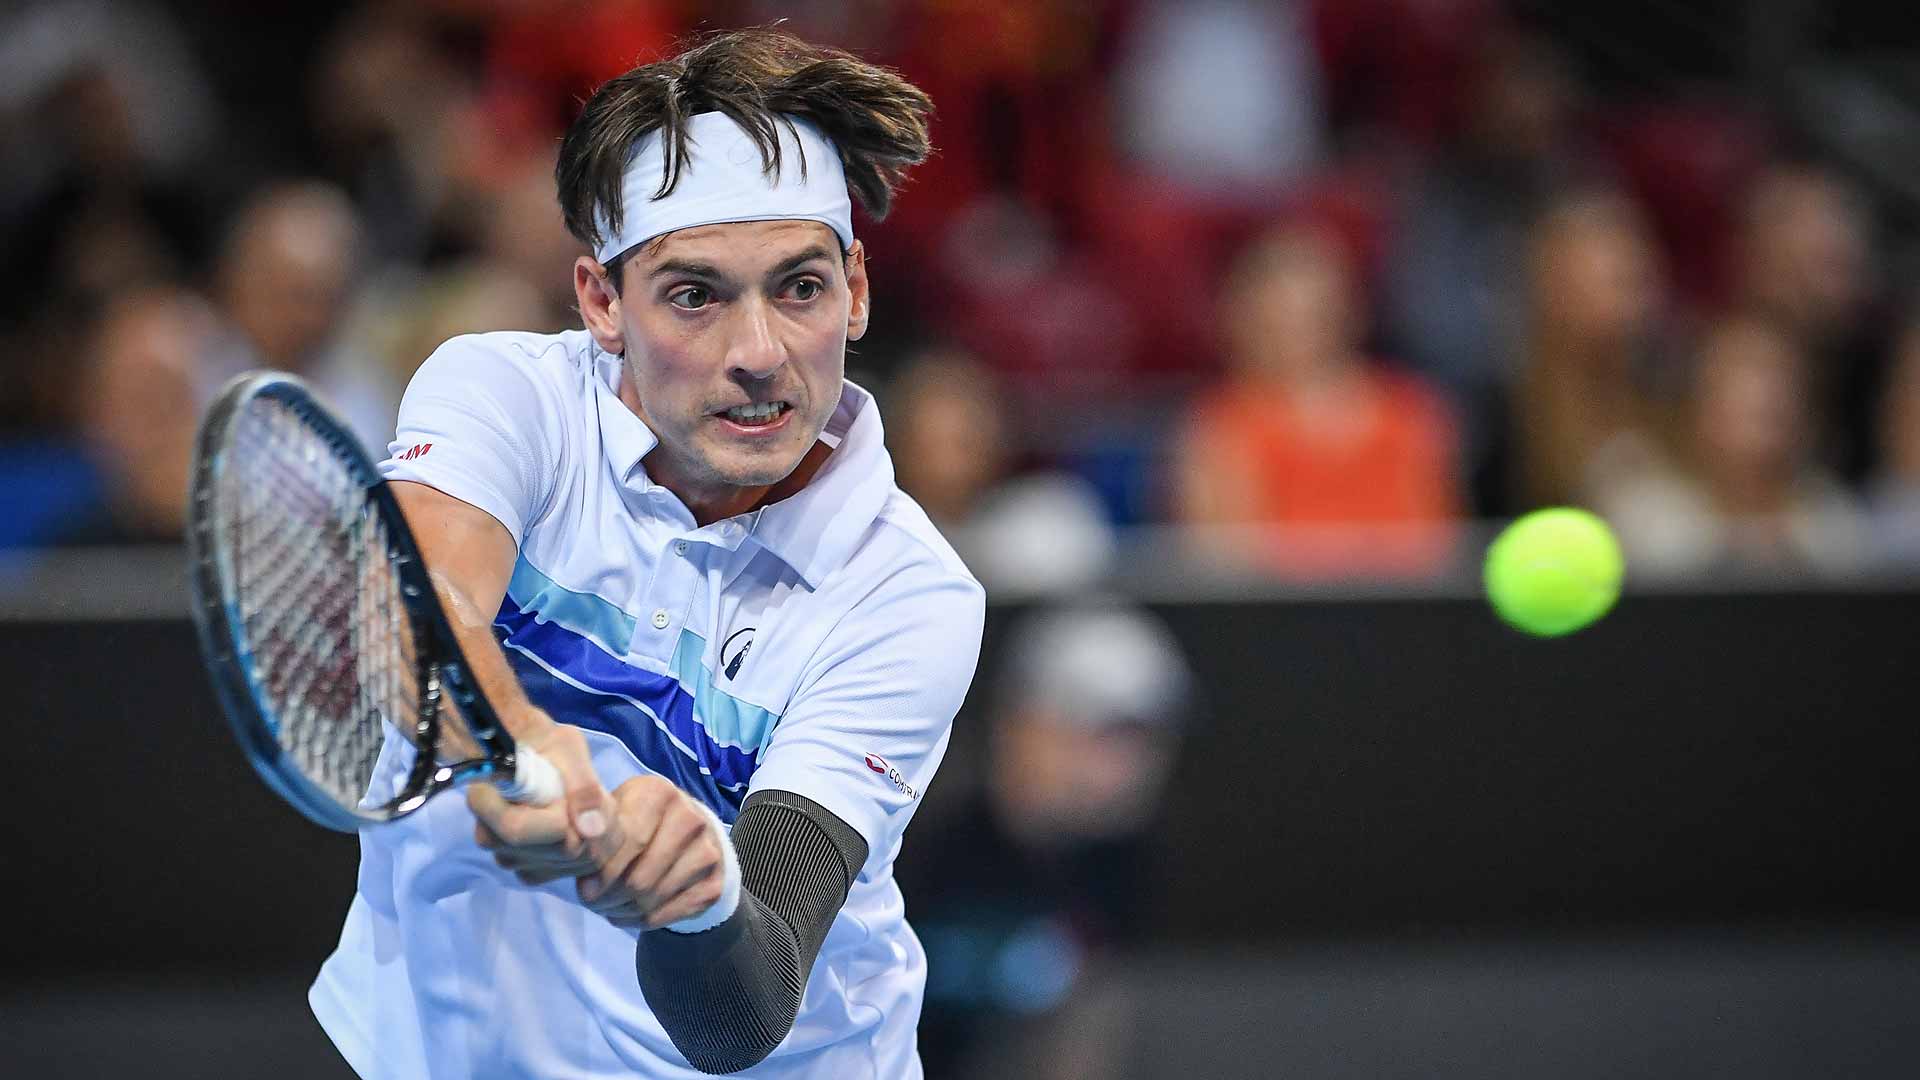 Marc-Andrea Huesler Clinches Maiden Title In Sofia ATP Tour Tennis